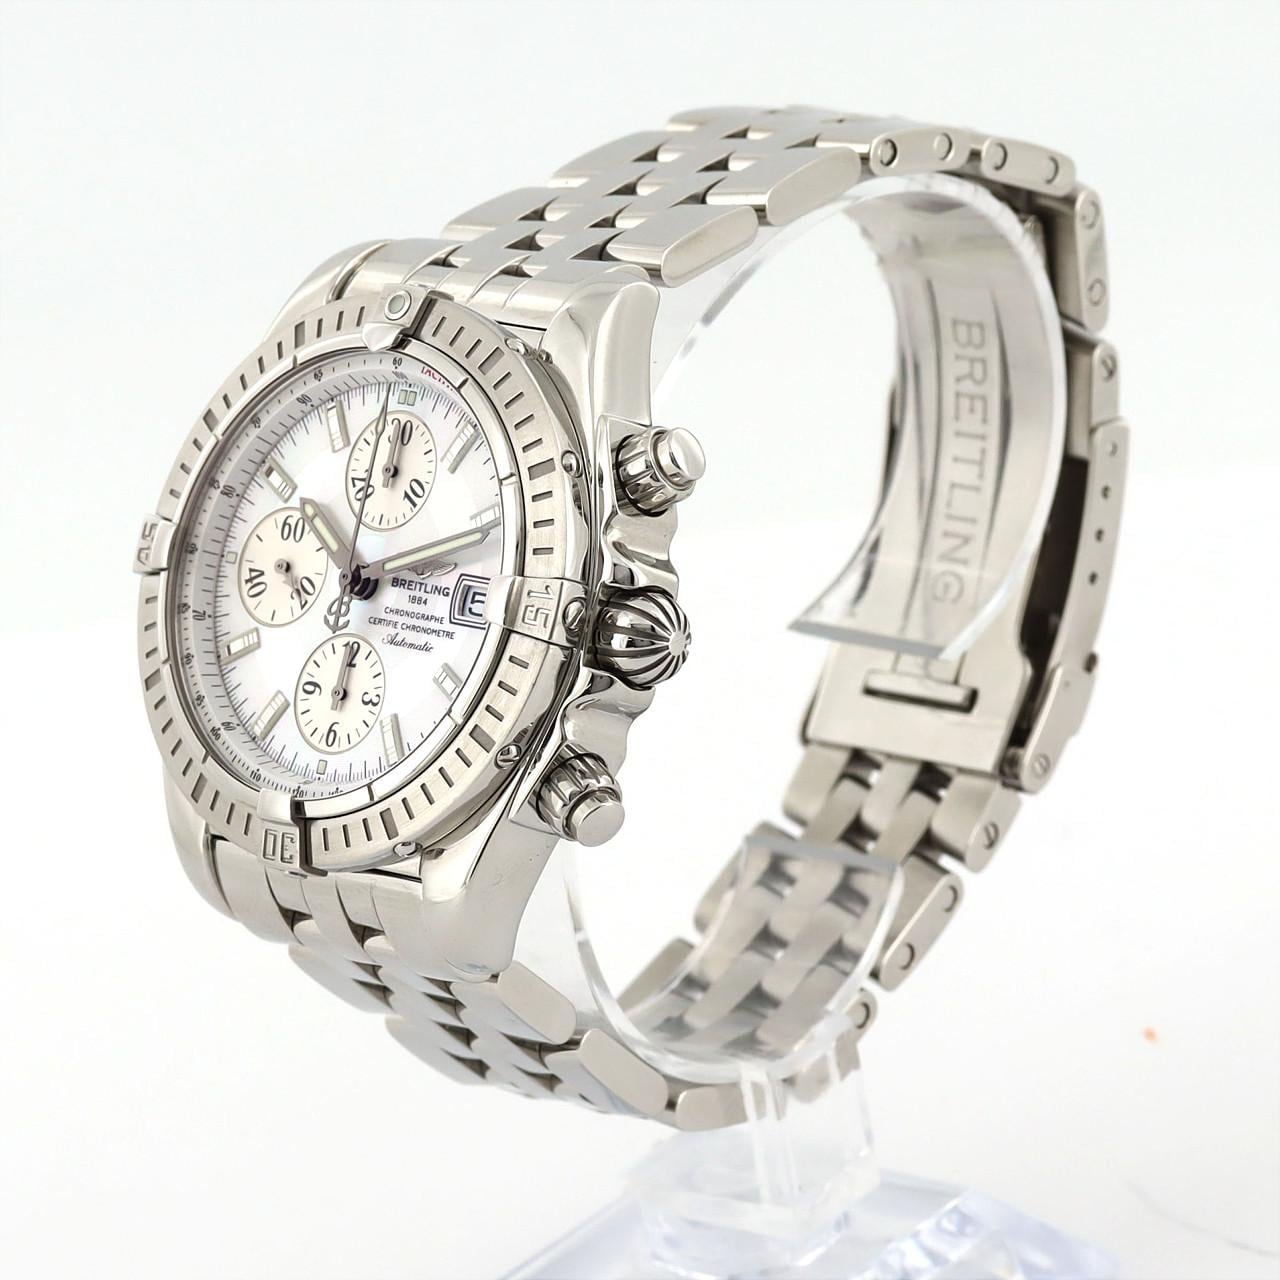 BREITLING Chronomat A13356/A156A69PA SS Automatic